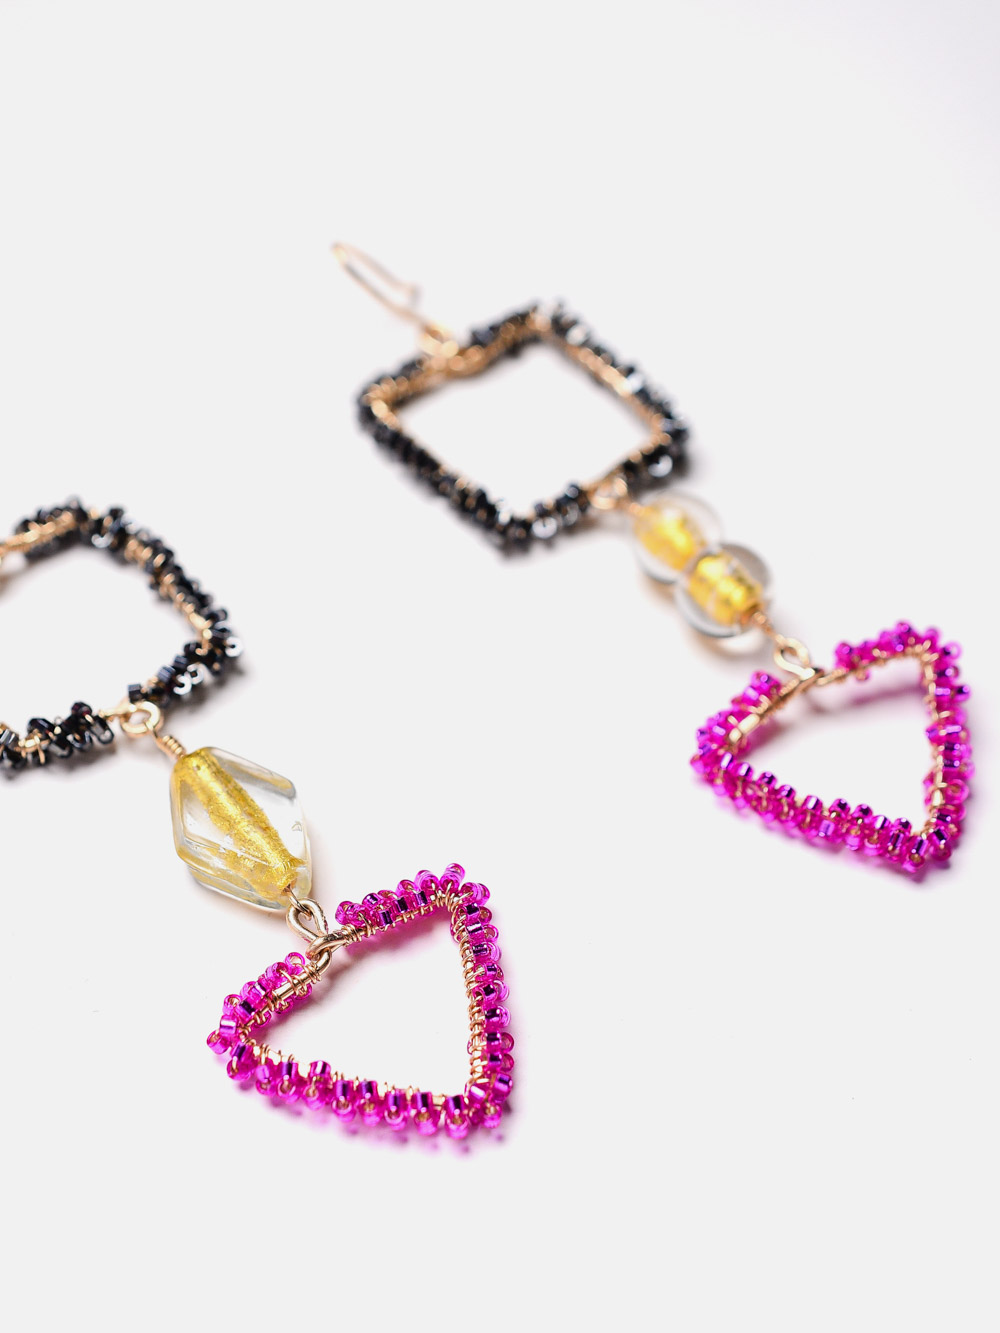 14k gold filled drop earrings with colorful beads